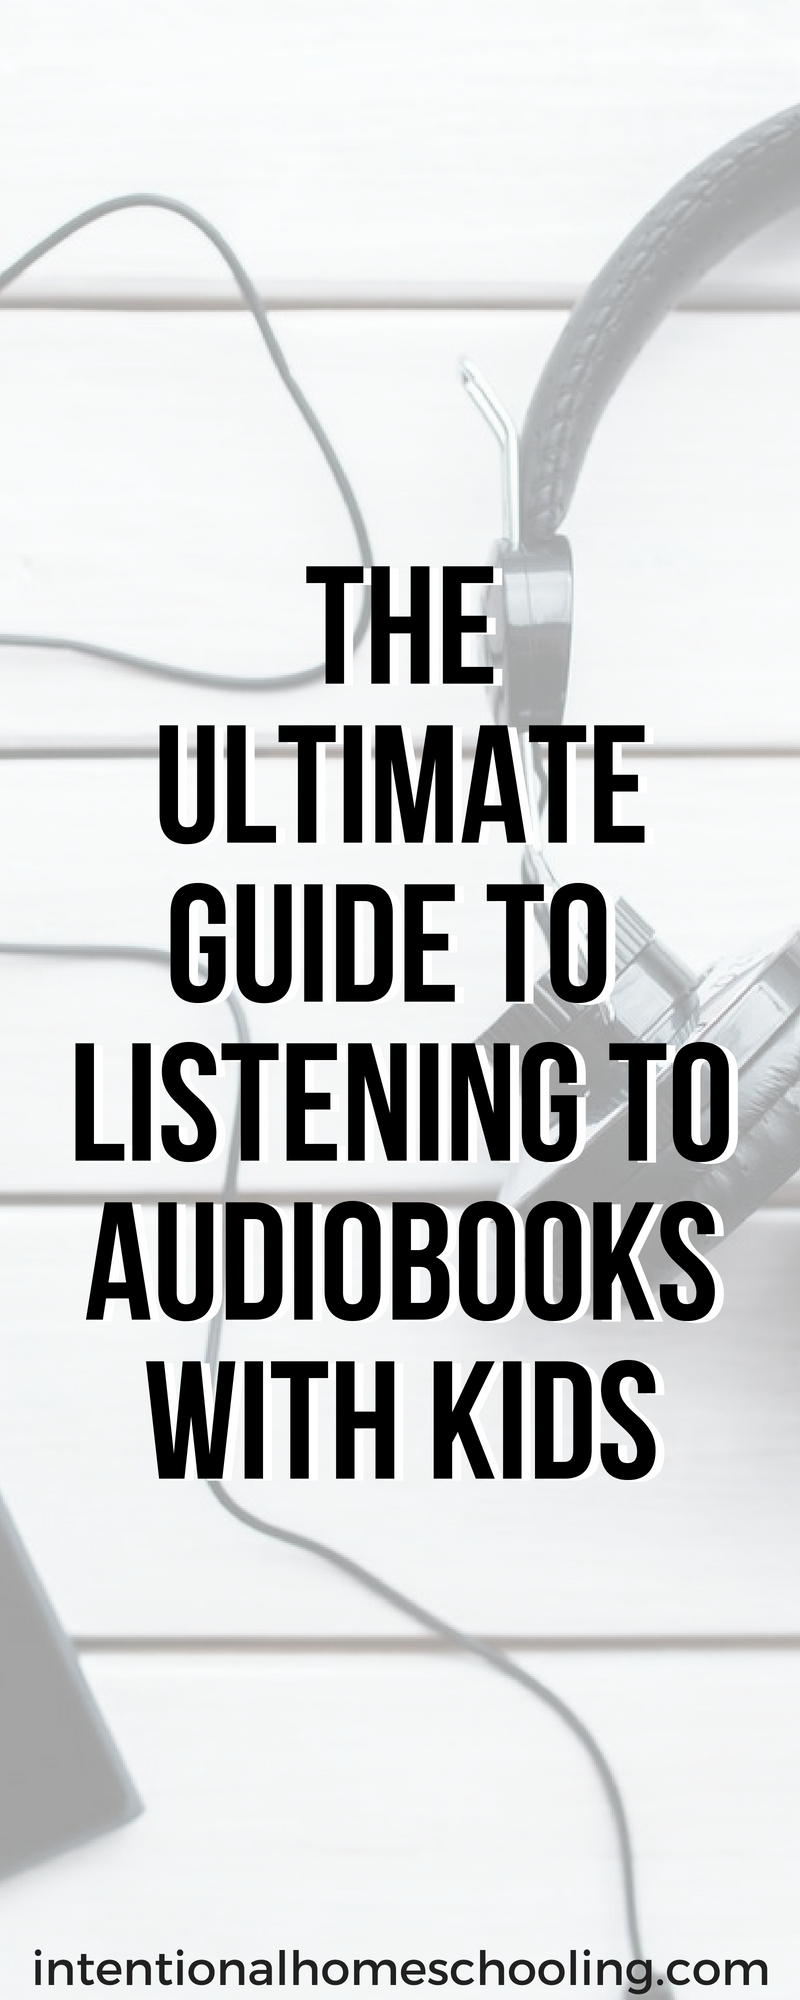 Want to listen to more audiobooks with your kids? Here is a great guide with lots of tips on how and when to listen to audiobooks with kids!